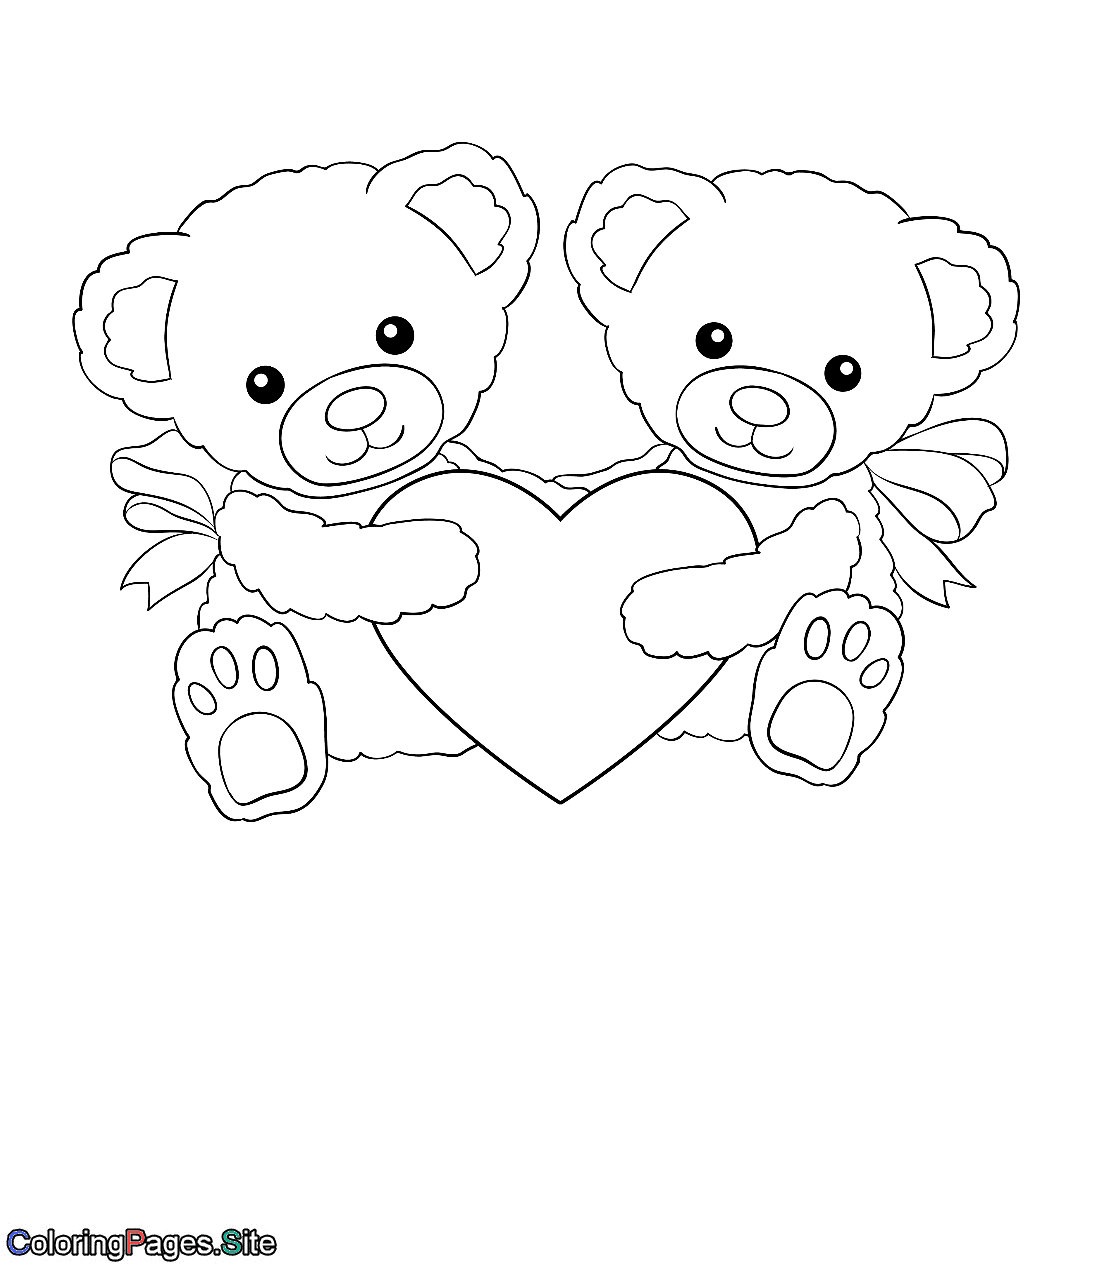 Valentines two bears holding a heart coloring page